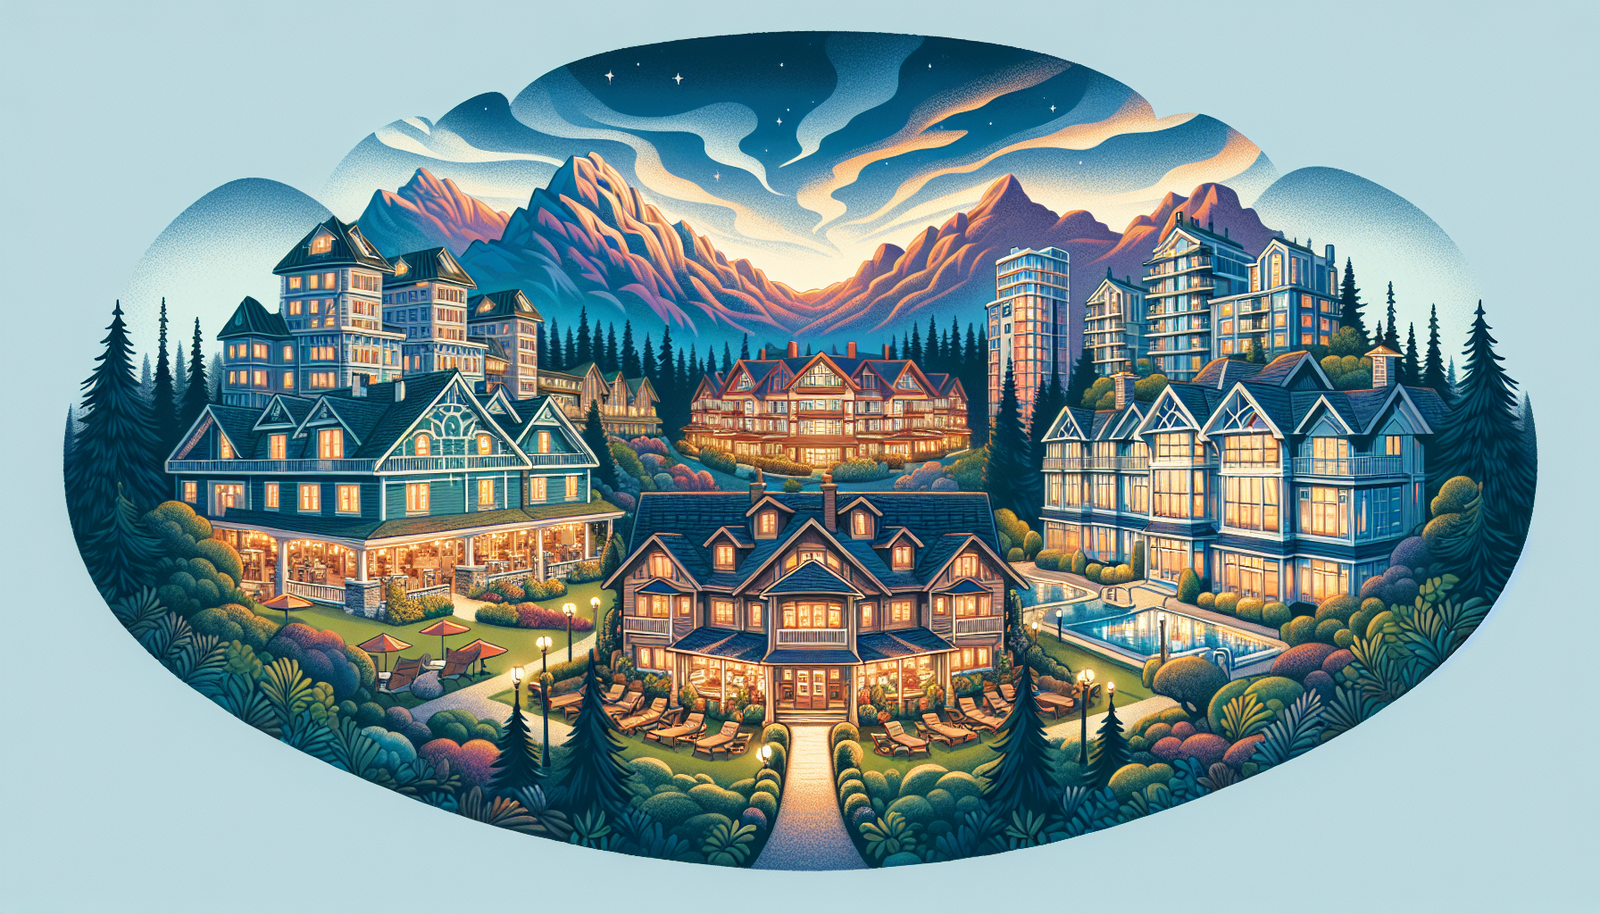 Illustration of various types of Squamish hotels